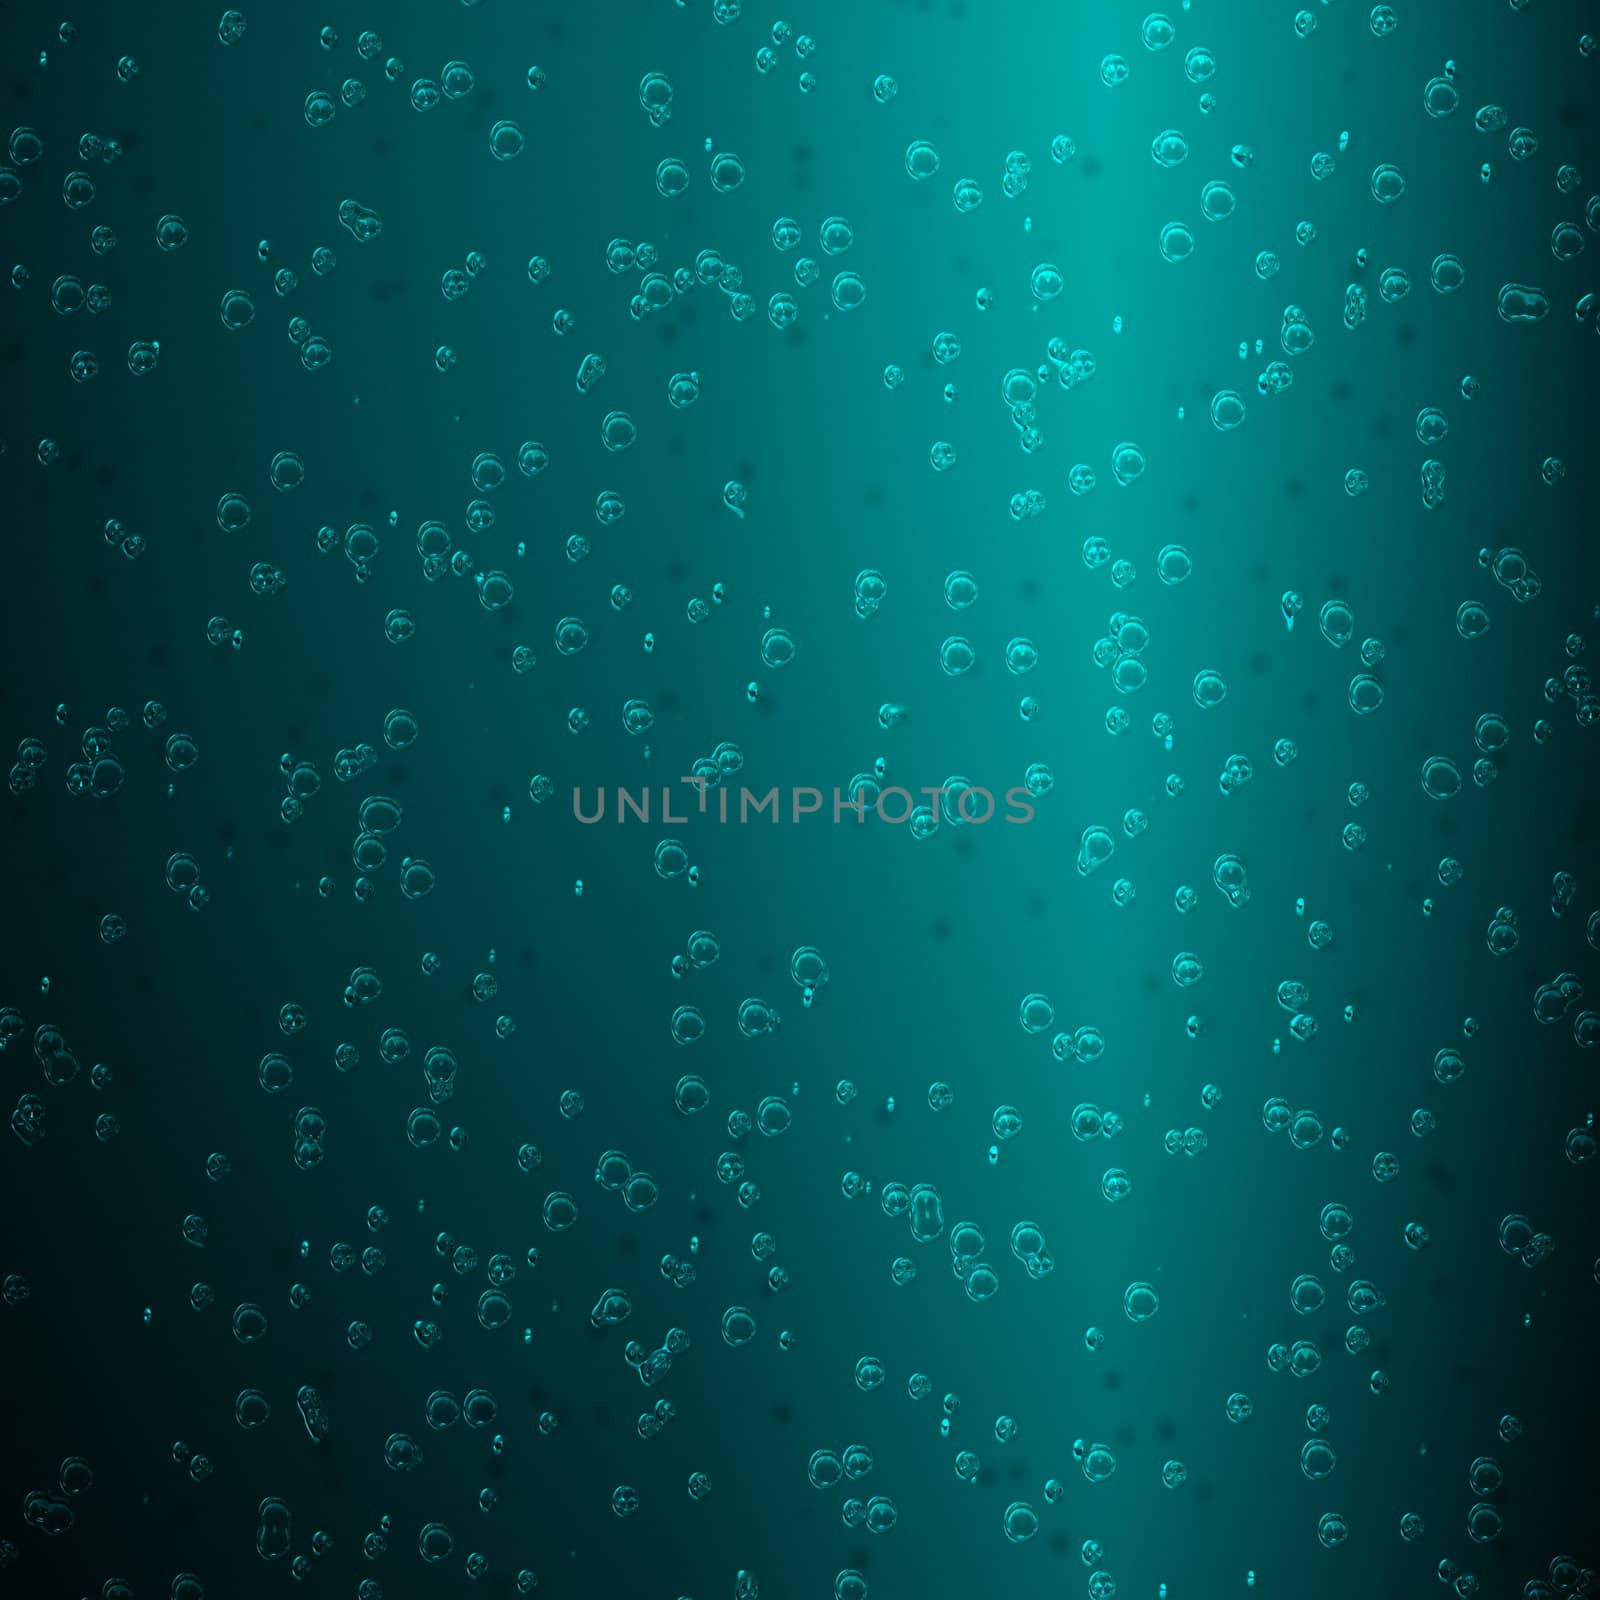 An illustration of a nice bubbles background